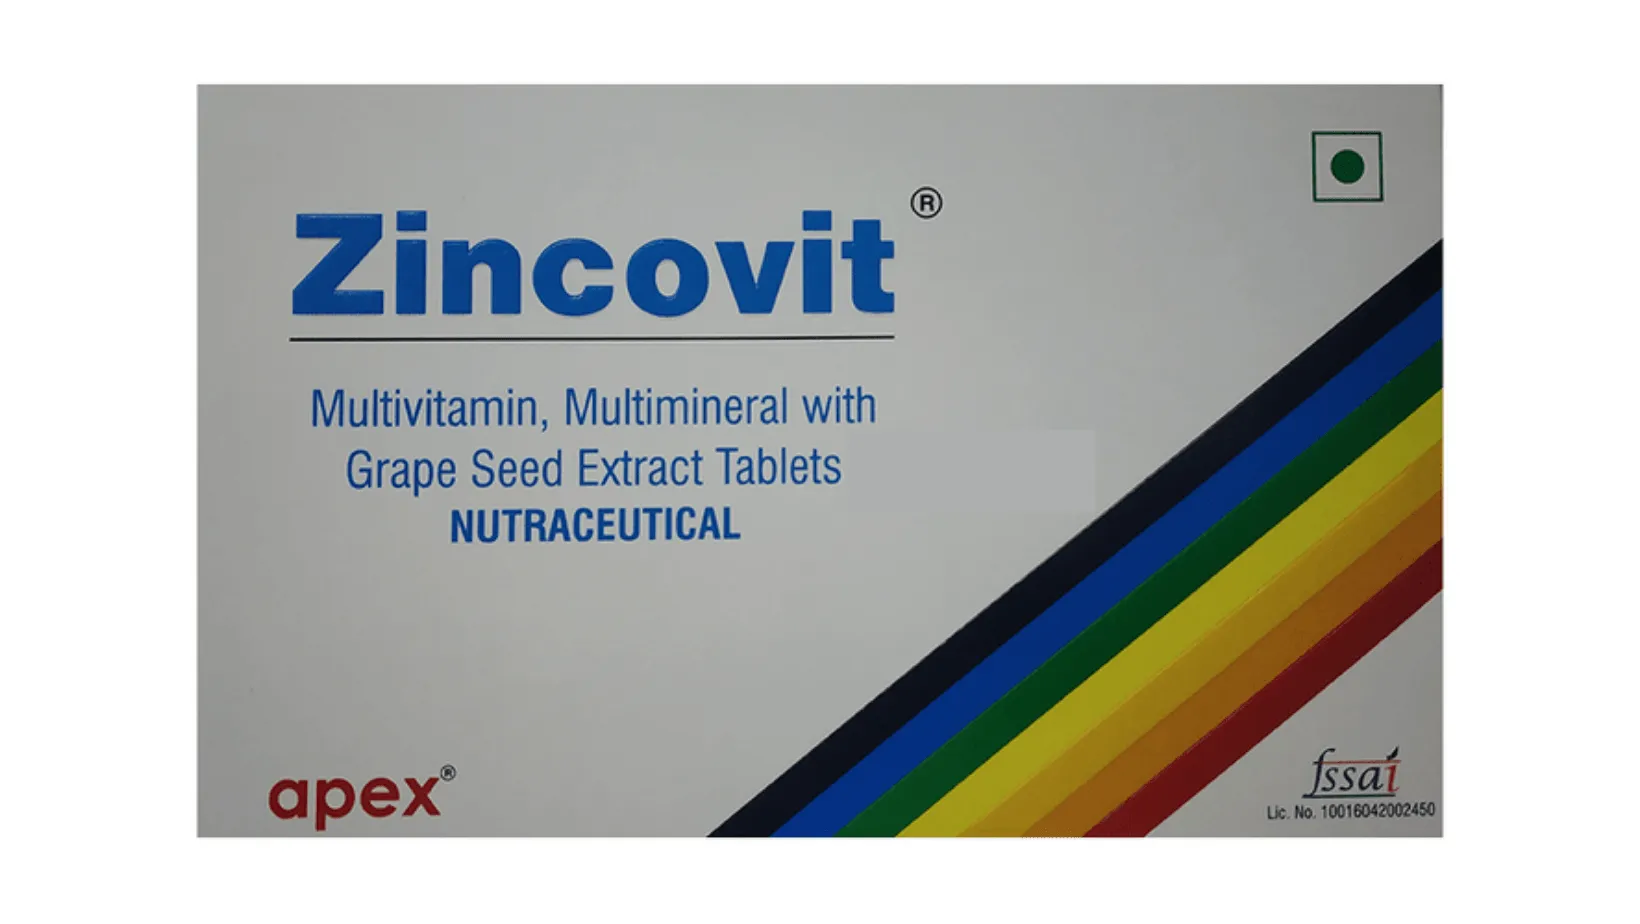 Zincovit Tablet - Benefits, Uses, Side effects, and Precautions